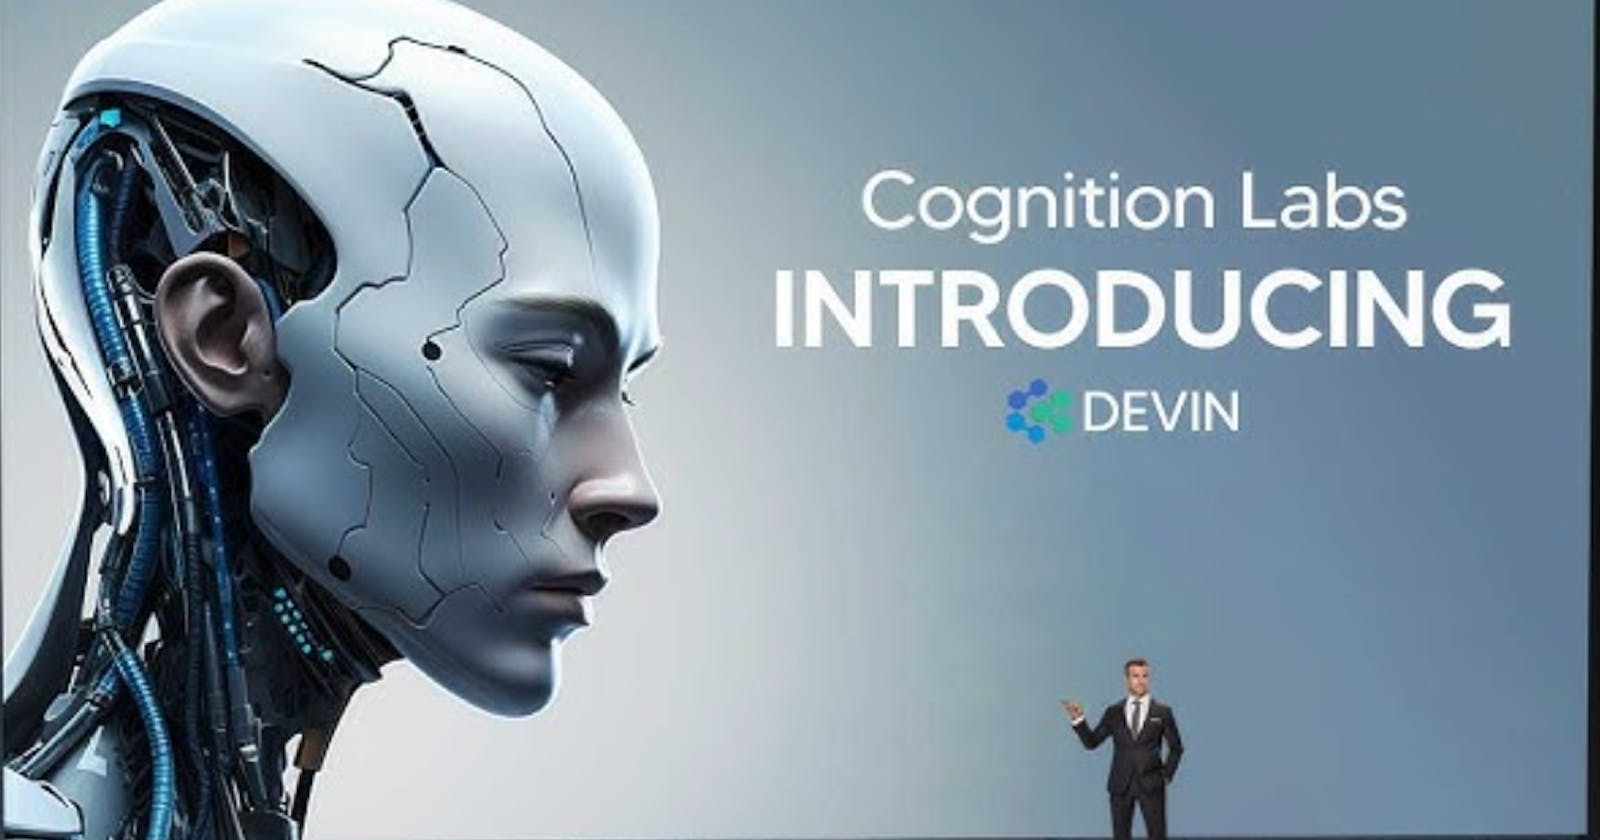 Devin AI: Pioneering the Next Generation of Artificial Intelligence